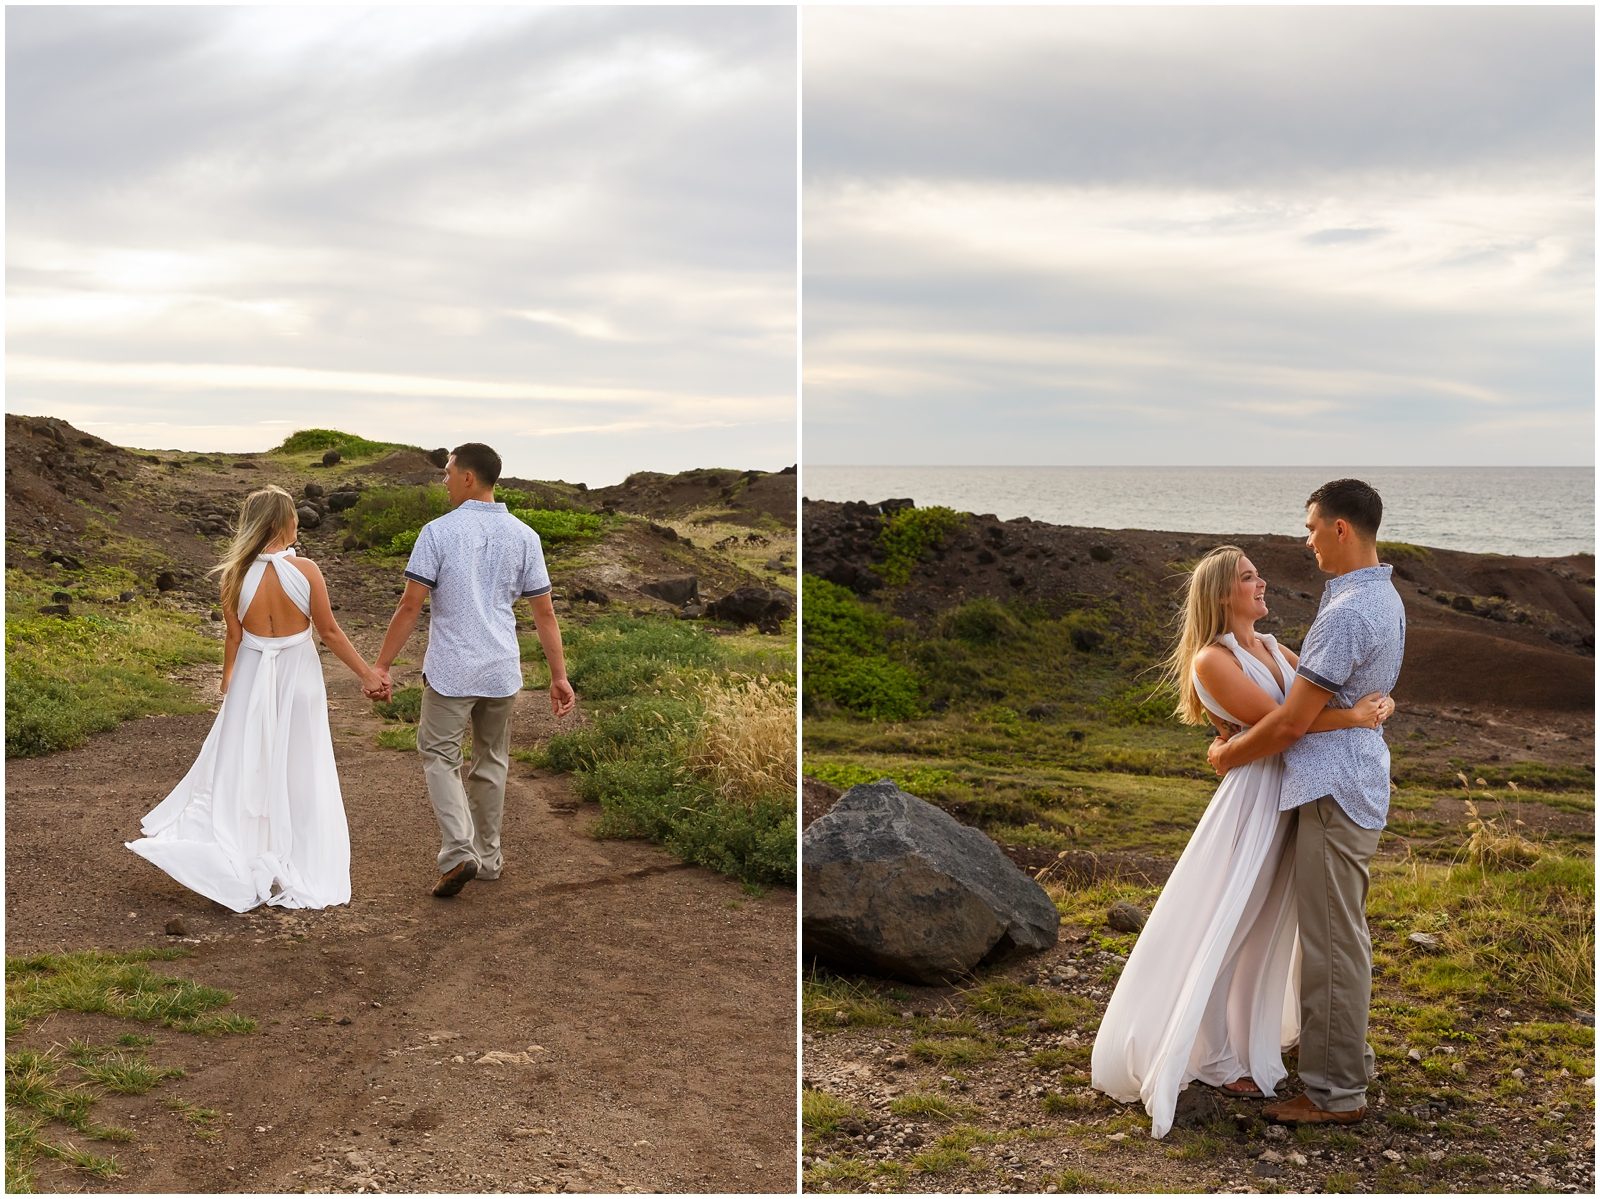 This couple explored Kaena Point on Oahu on their wedding day.